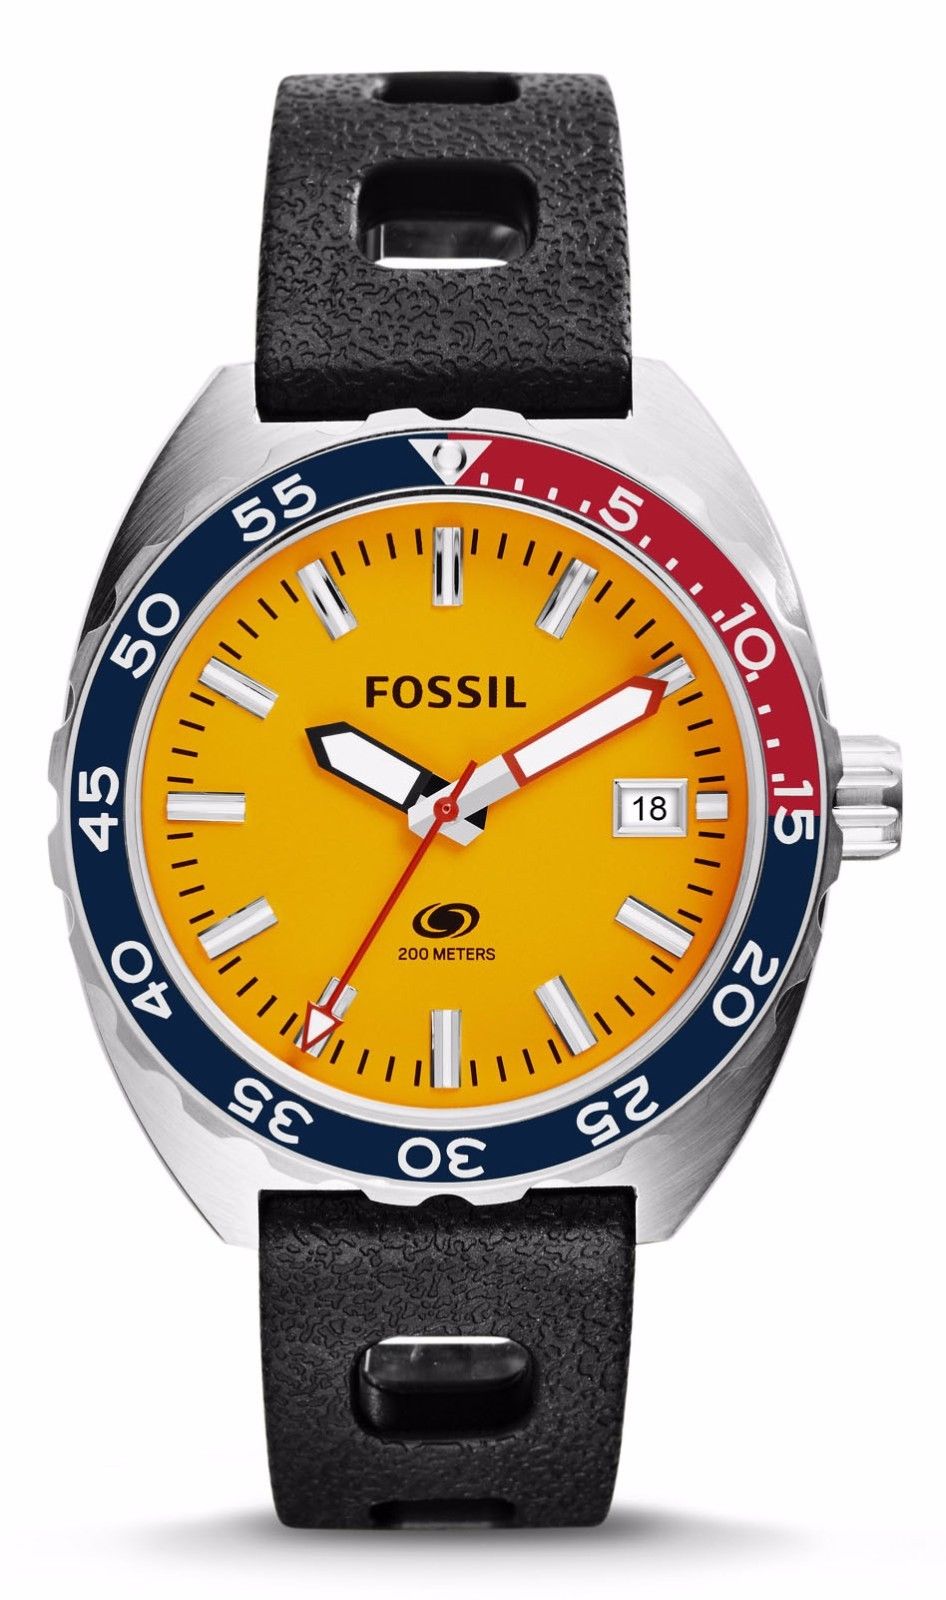 Fossil FS5052 Men's Breaker Three Hand Date Silicone Band Yellow Dial Watch